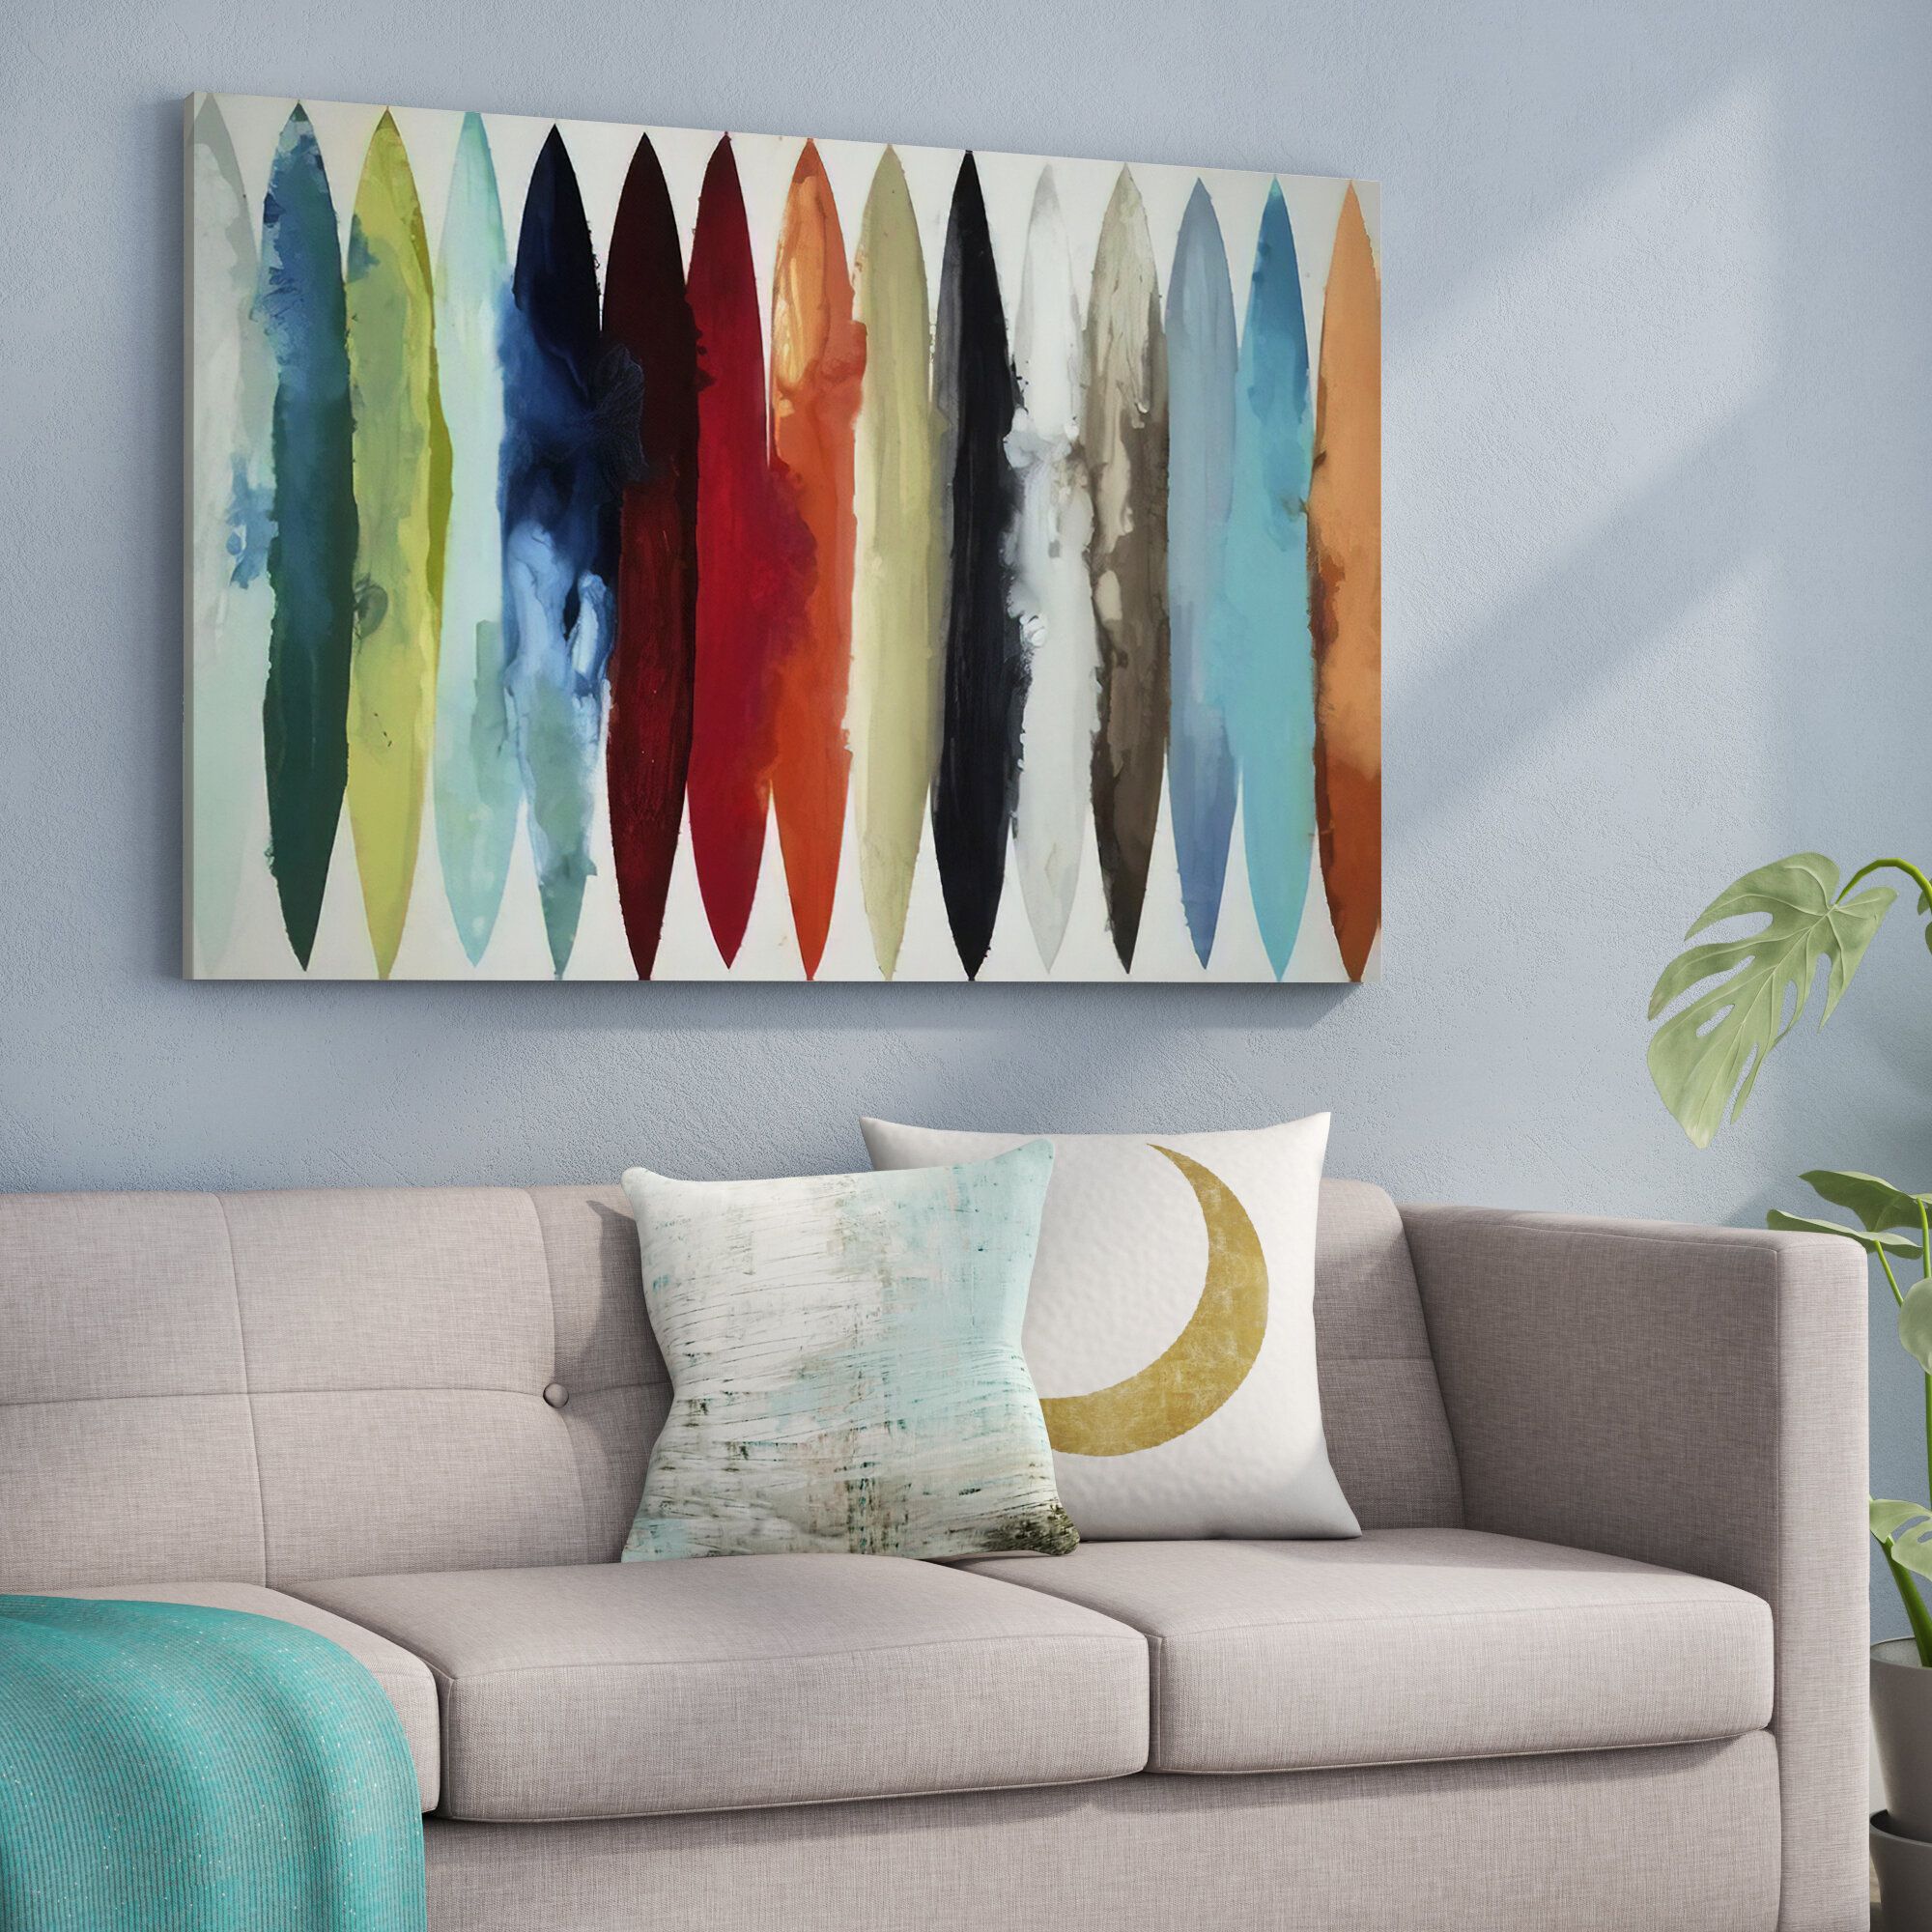 Wrought Studio Even Flowrandy Hibberd – Print & Reviews | Wayfair Within Abstract Flow Wall Art (View 10 of 15)